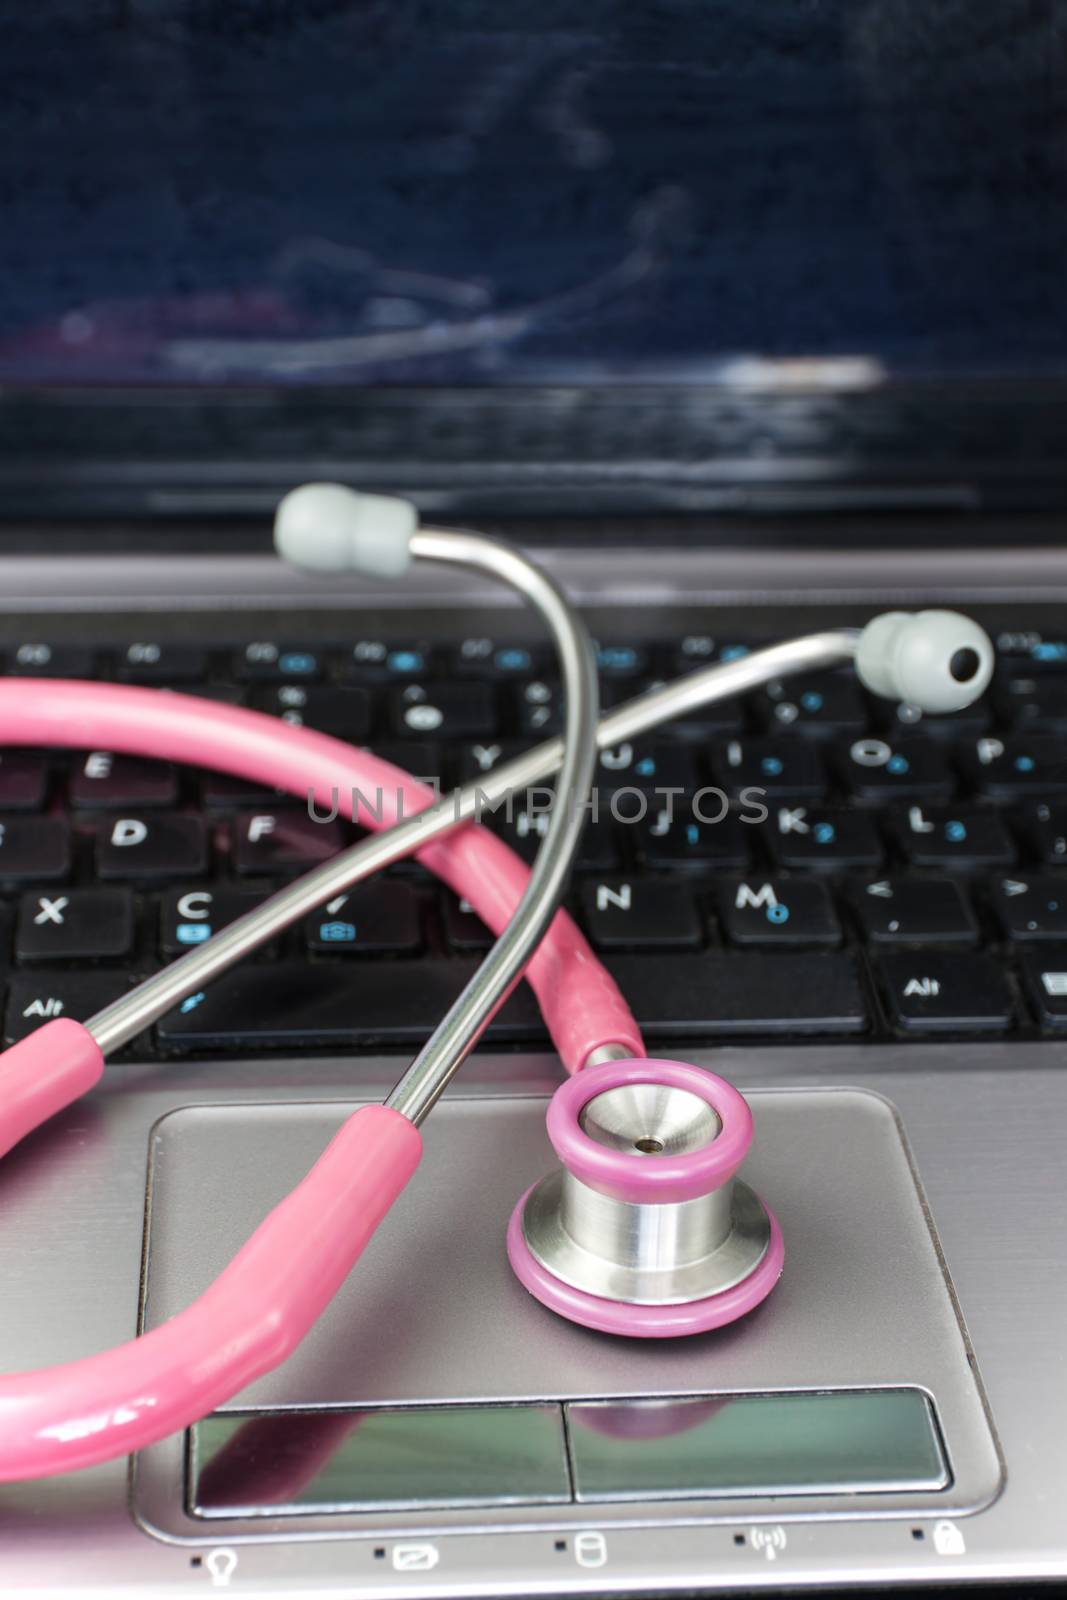 Stethoscope and Laptop.Maintaining computer concepts and idea.